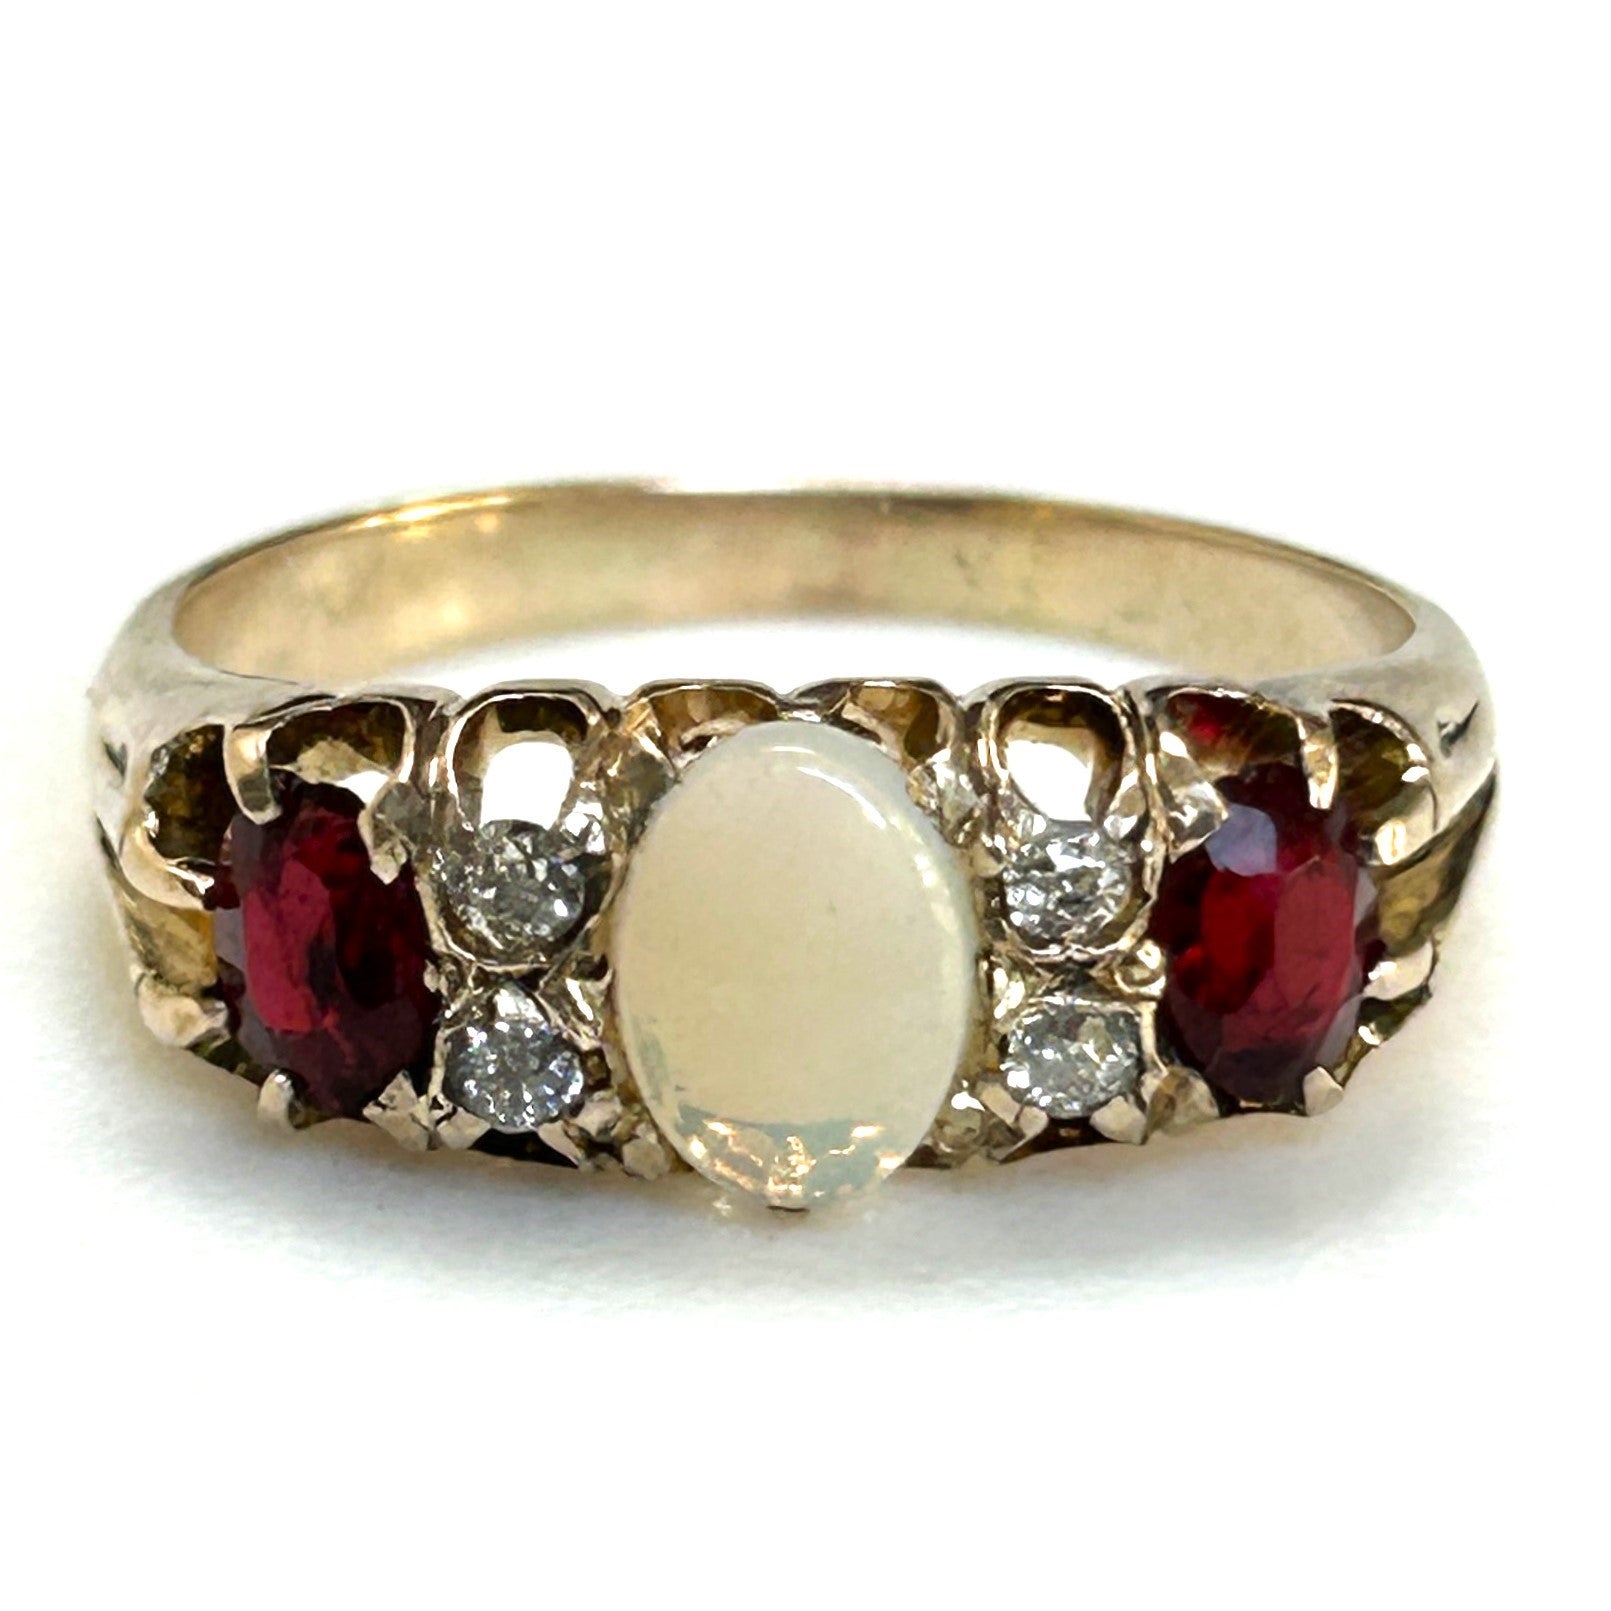 Antique 9ct Gold, Opal, Garnet, and Diamond Ring